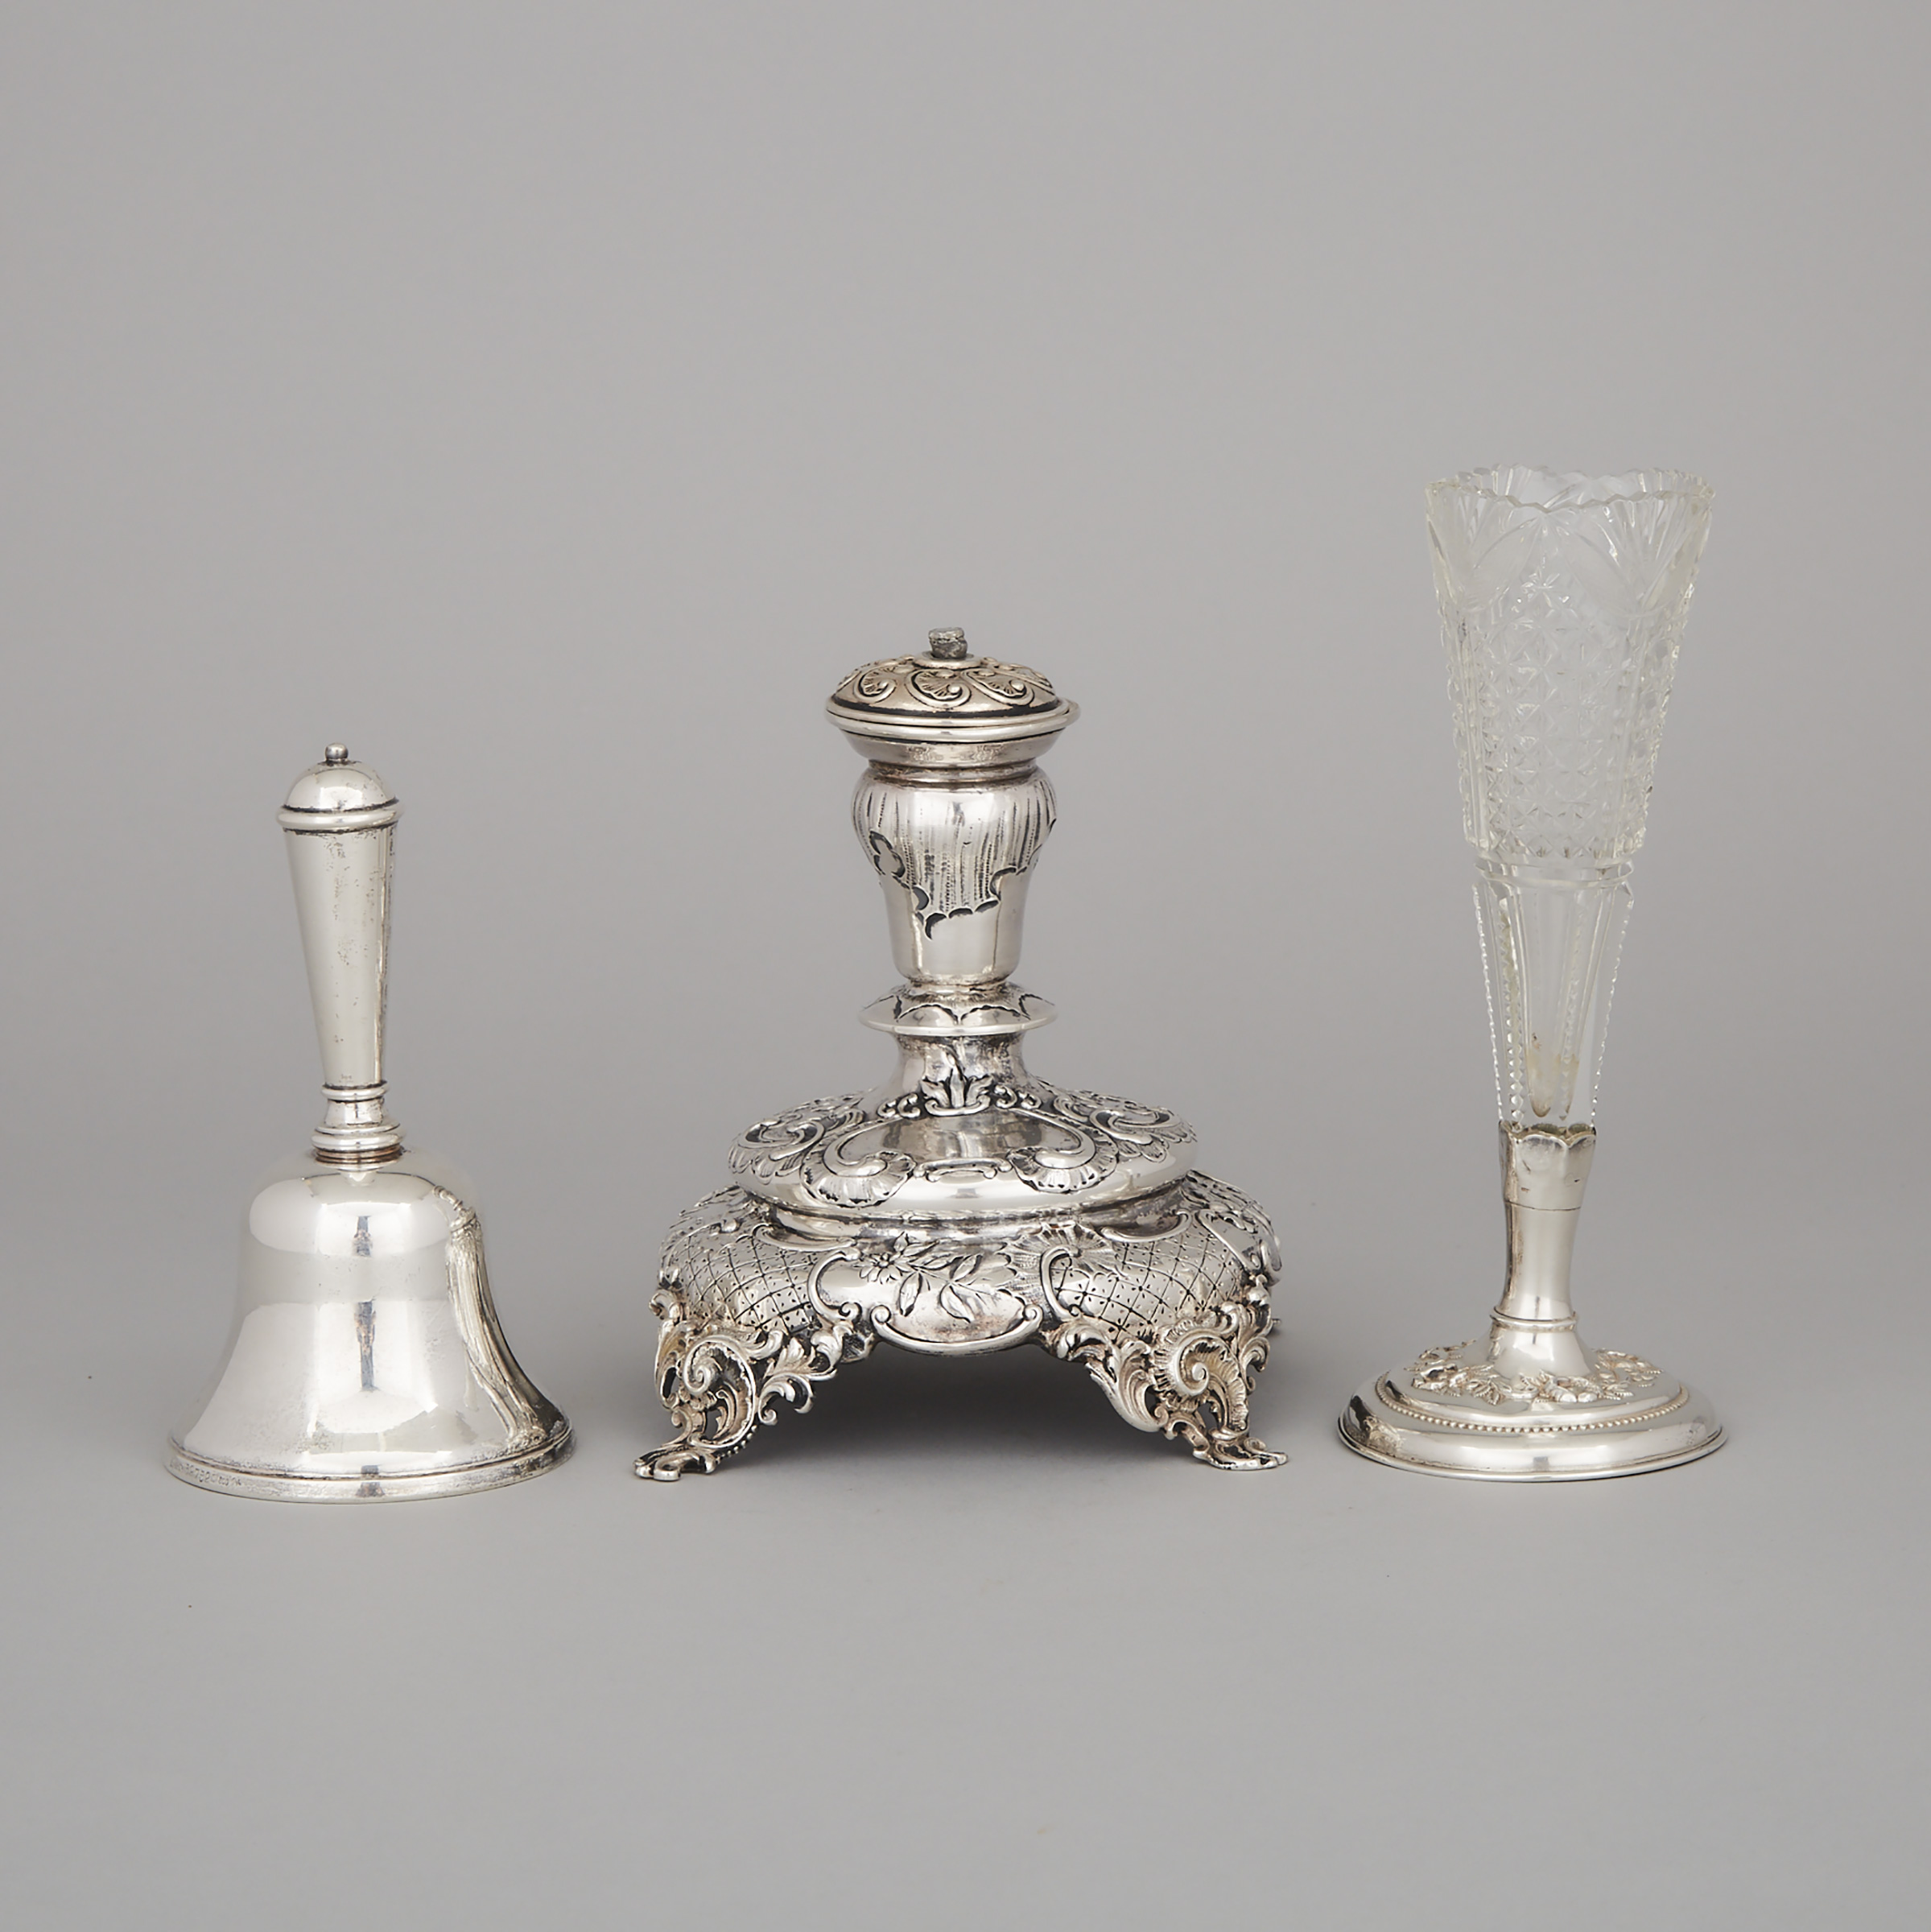 German Silver Table Bell, Comport Base and a Canadian Silver Mounted Cut Glass Vase, early 20th century